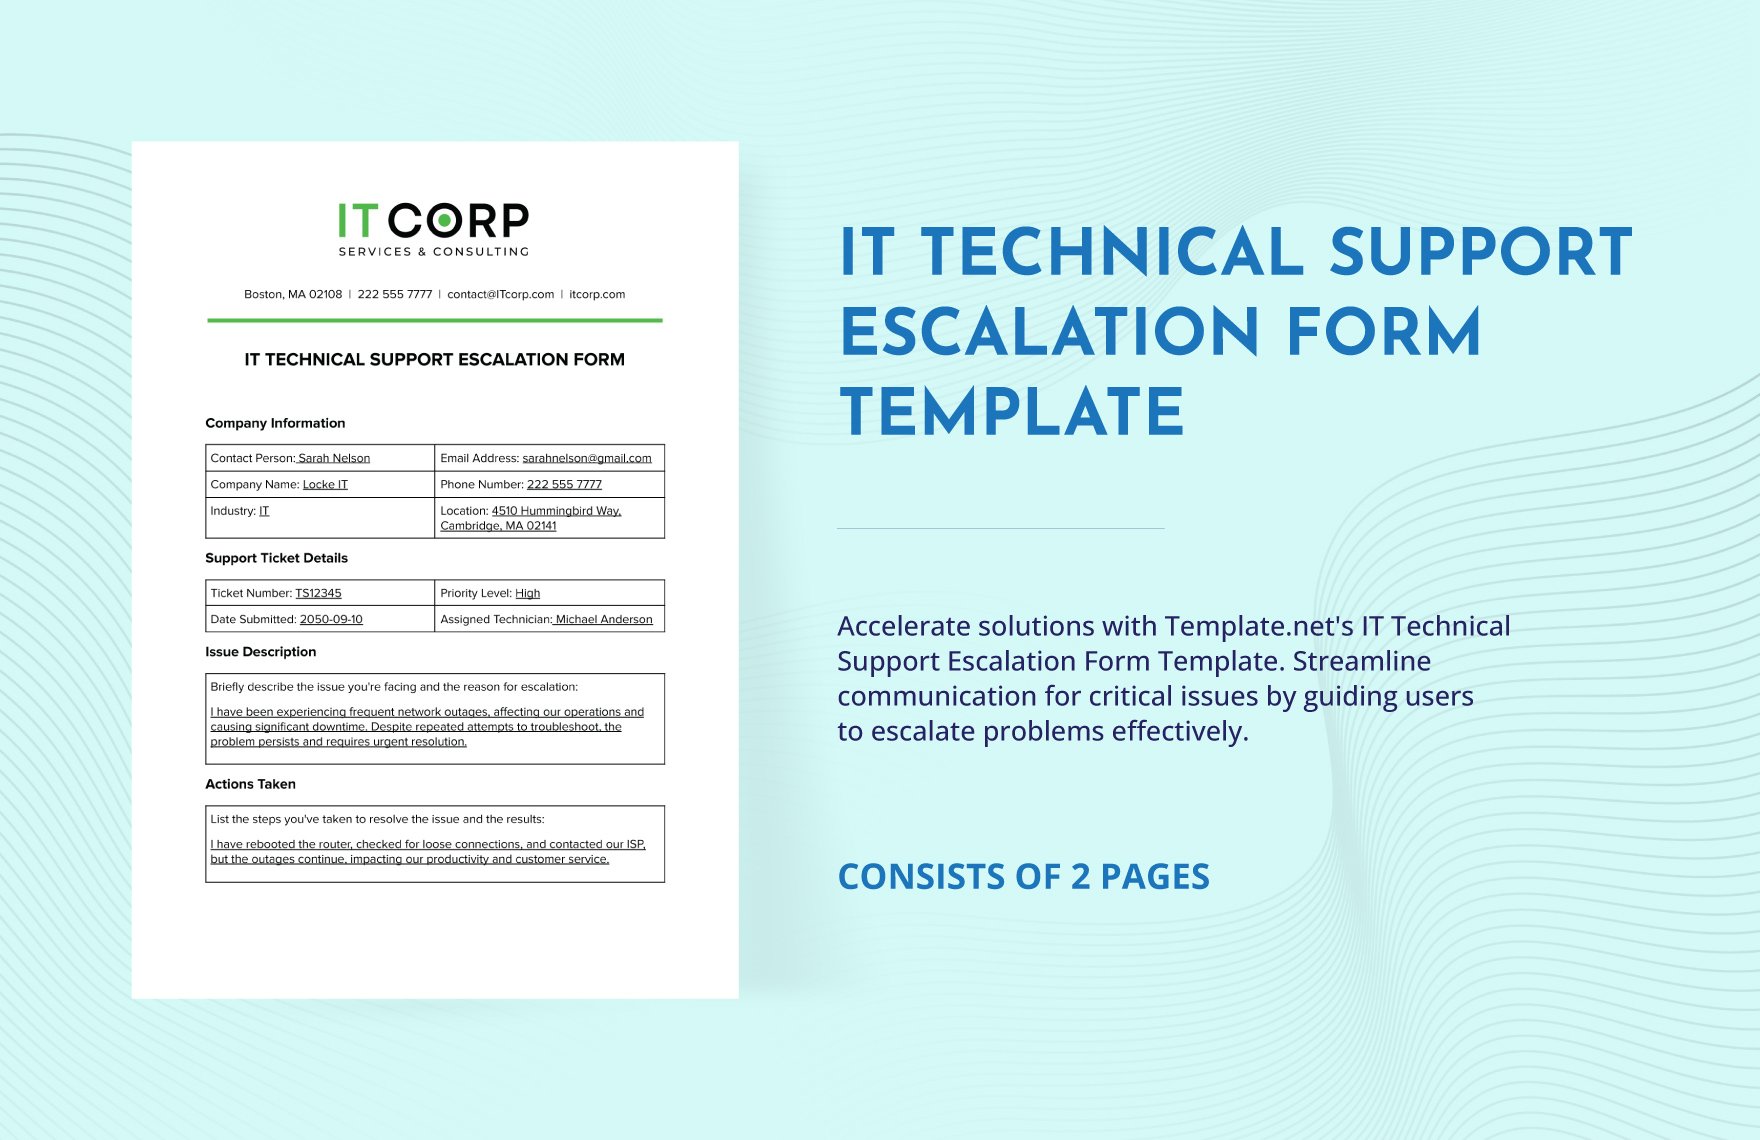 IT Technical Support Escalation Form Template